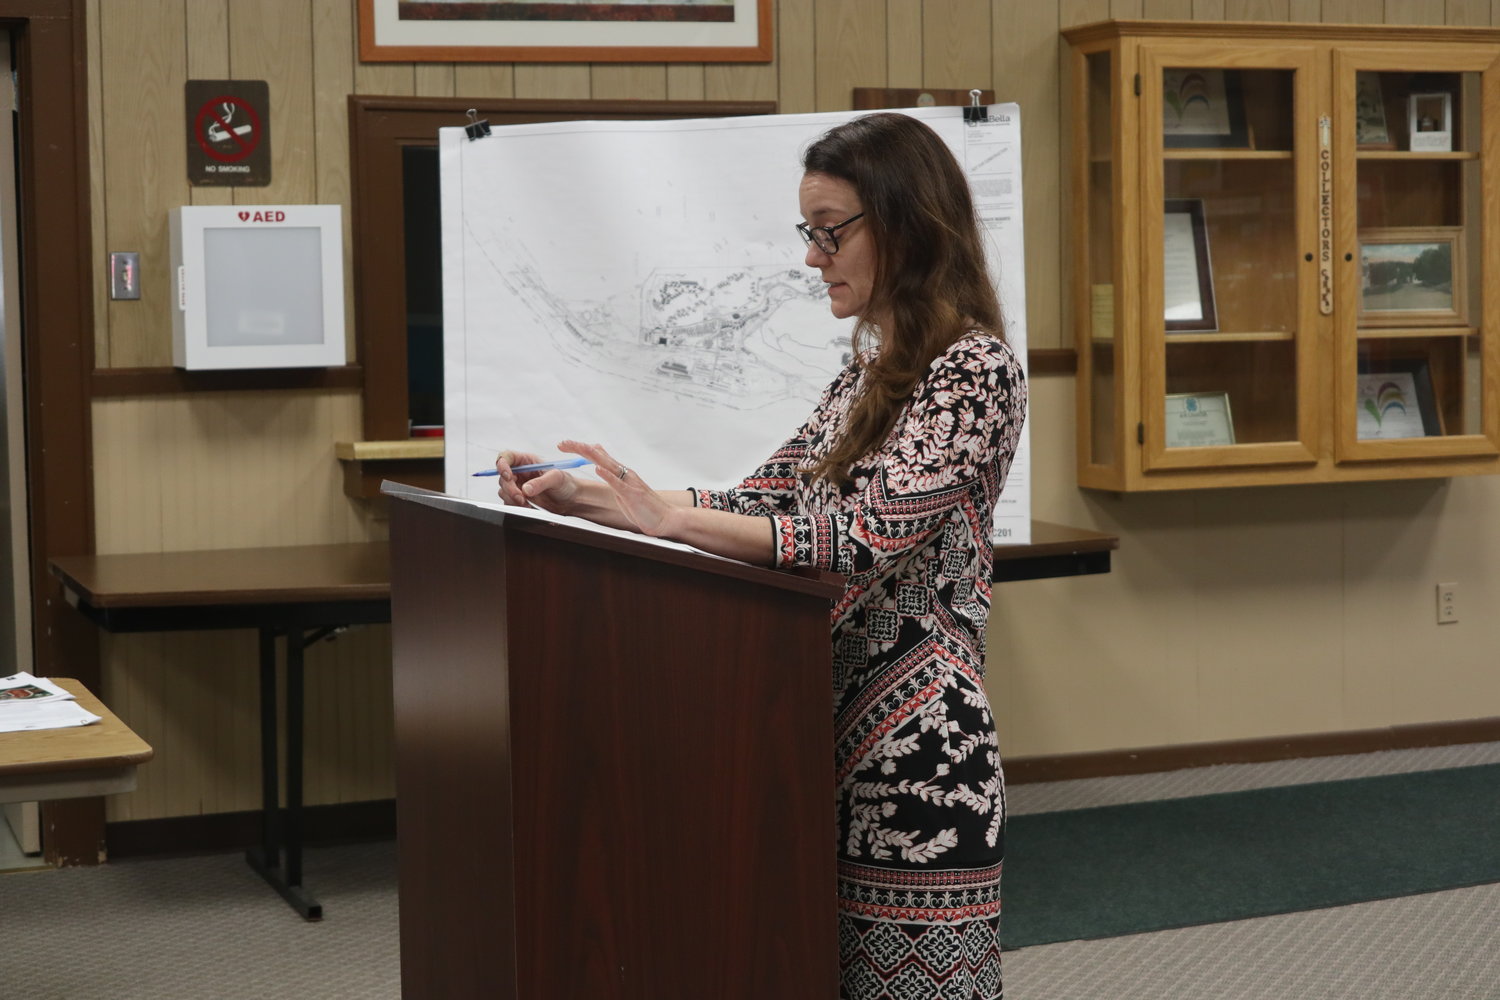 Caren LoButto, of LaBella Engineering, presents the latest plans for the expansion and rebranding of Kittatinny Campgrounds in Barryville as Camp Fimfo-Catskllls.